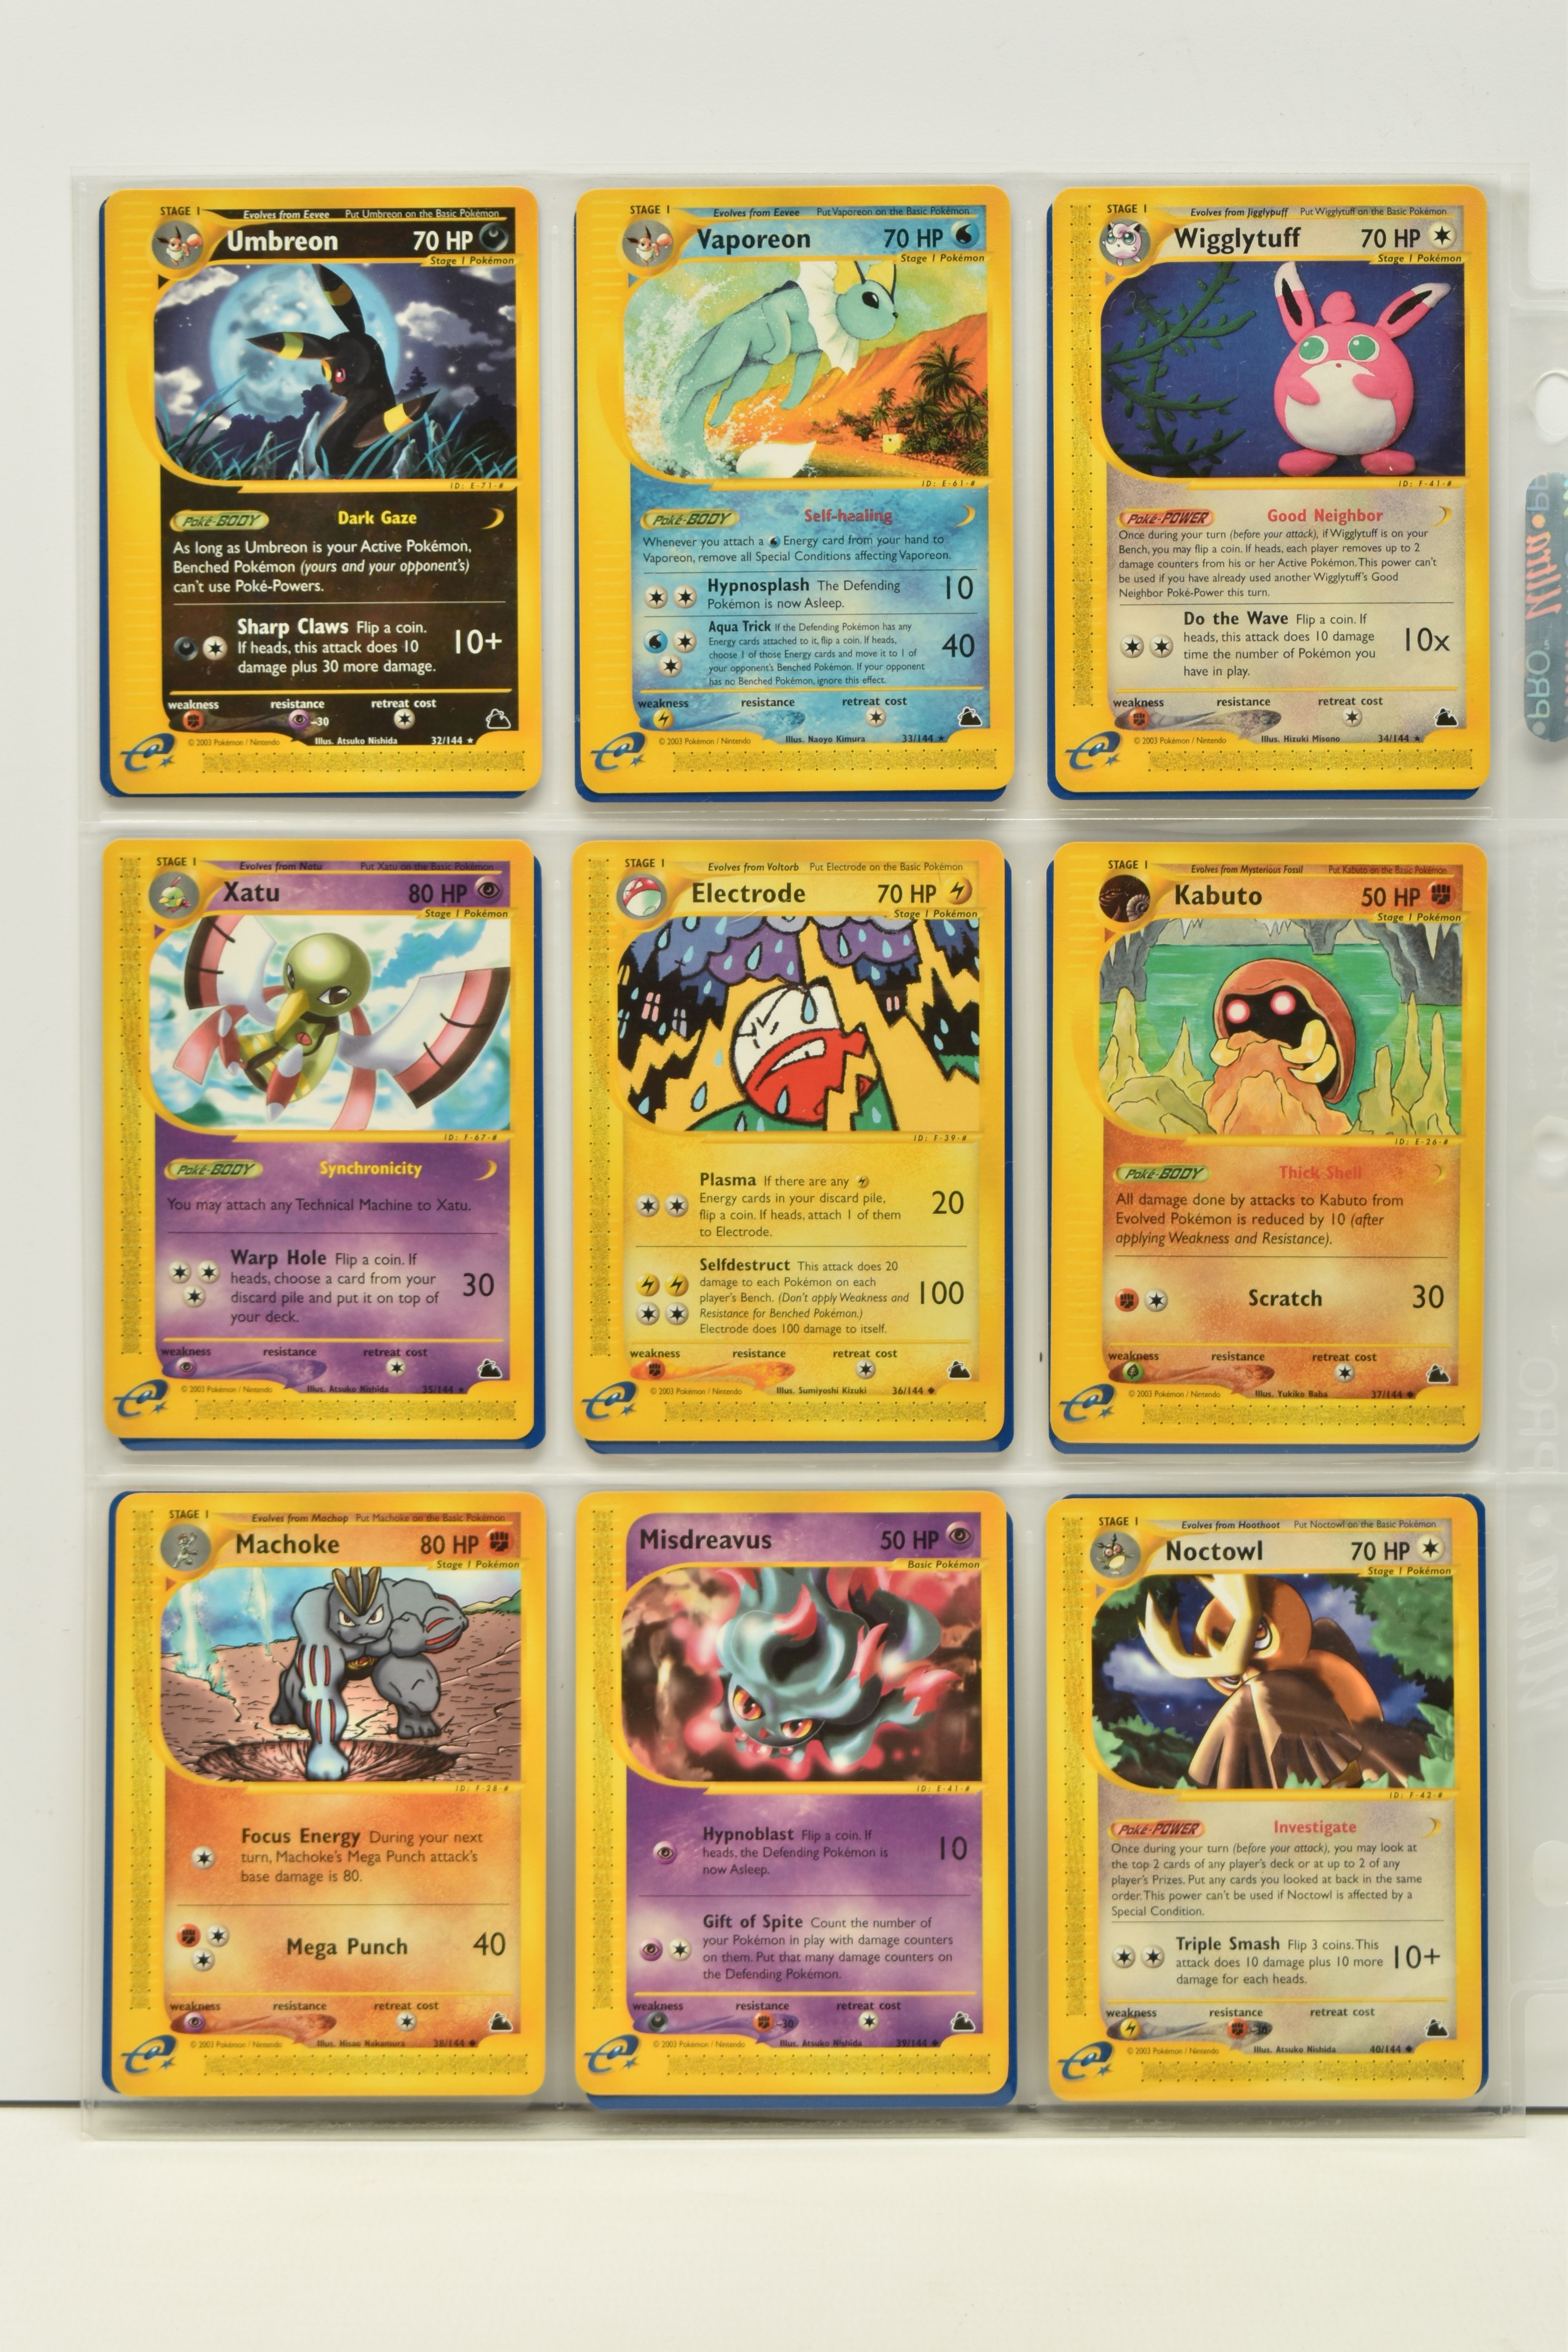 POKEMON COMPLETE SKYRIDGE MASTER SET, all cards are present, including all the secret rare cards and - Image 8 of 37